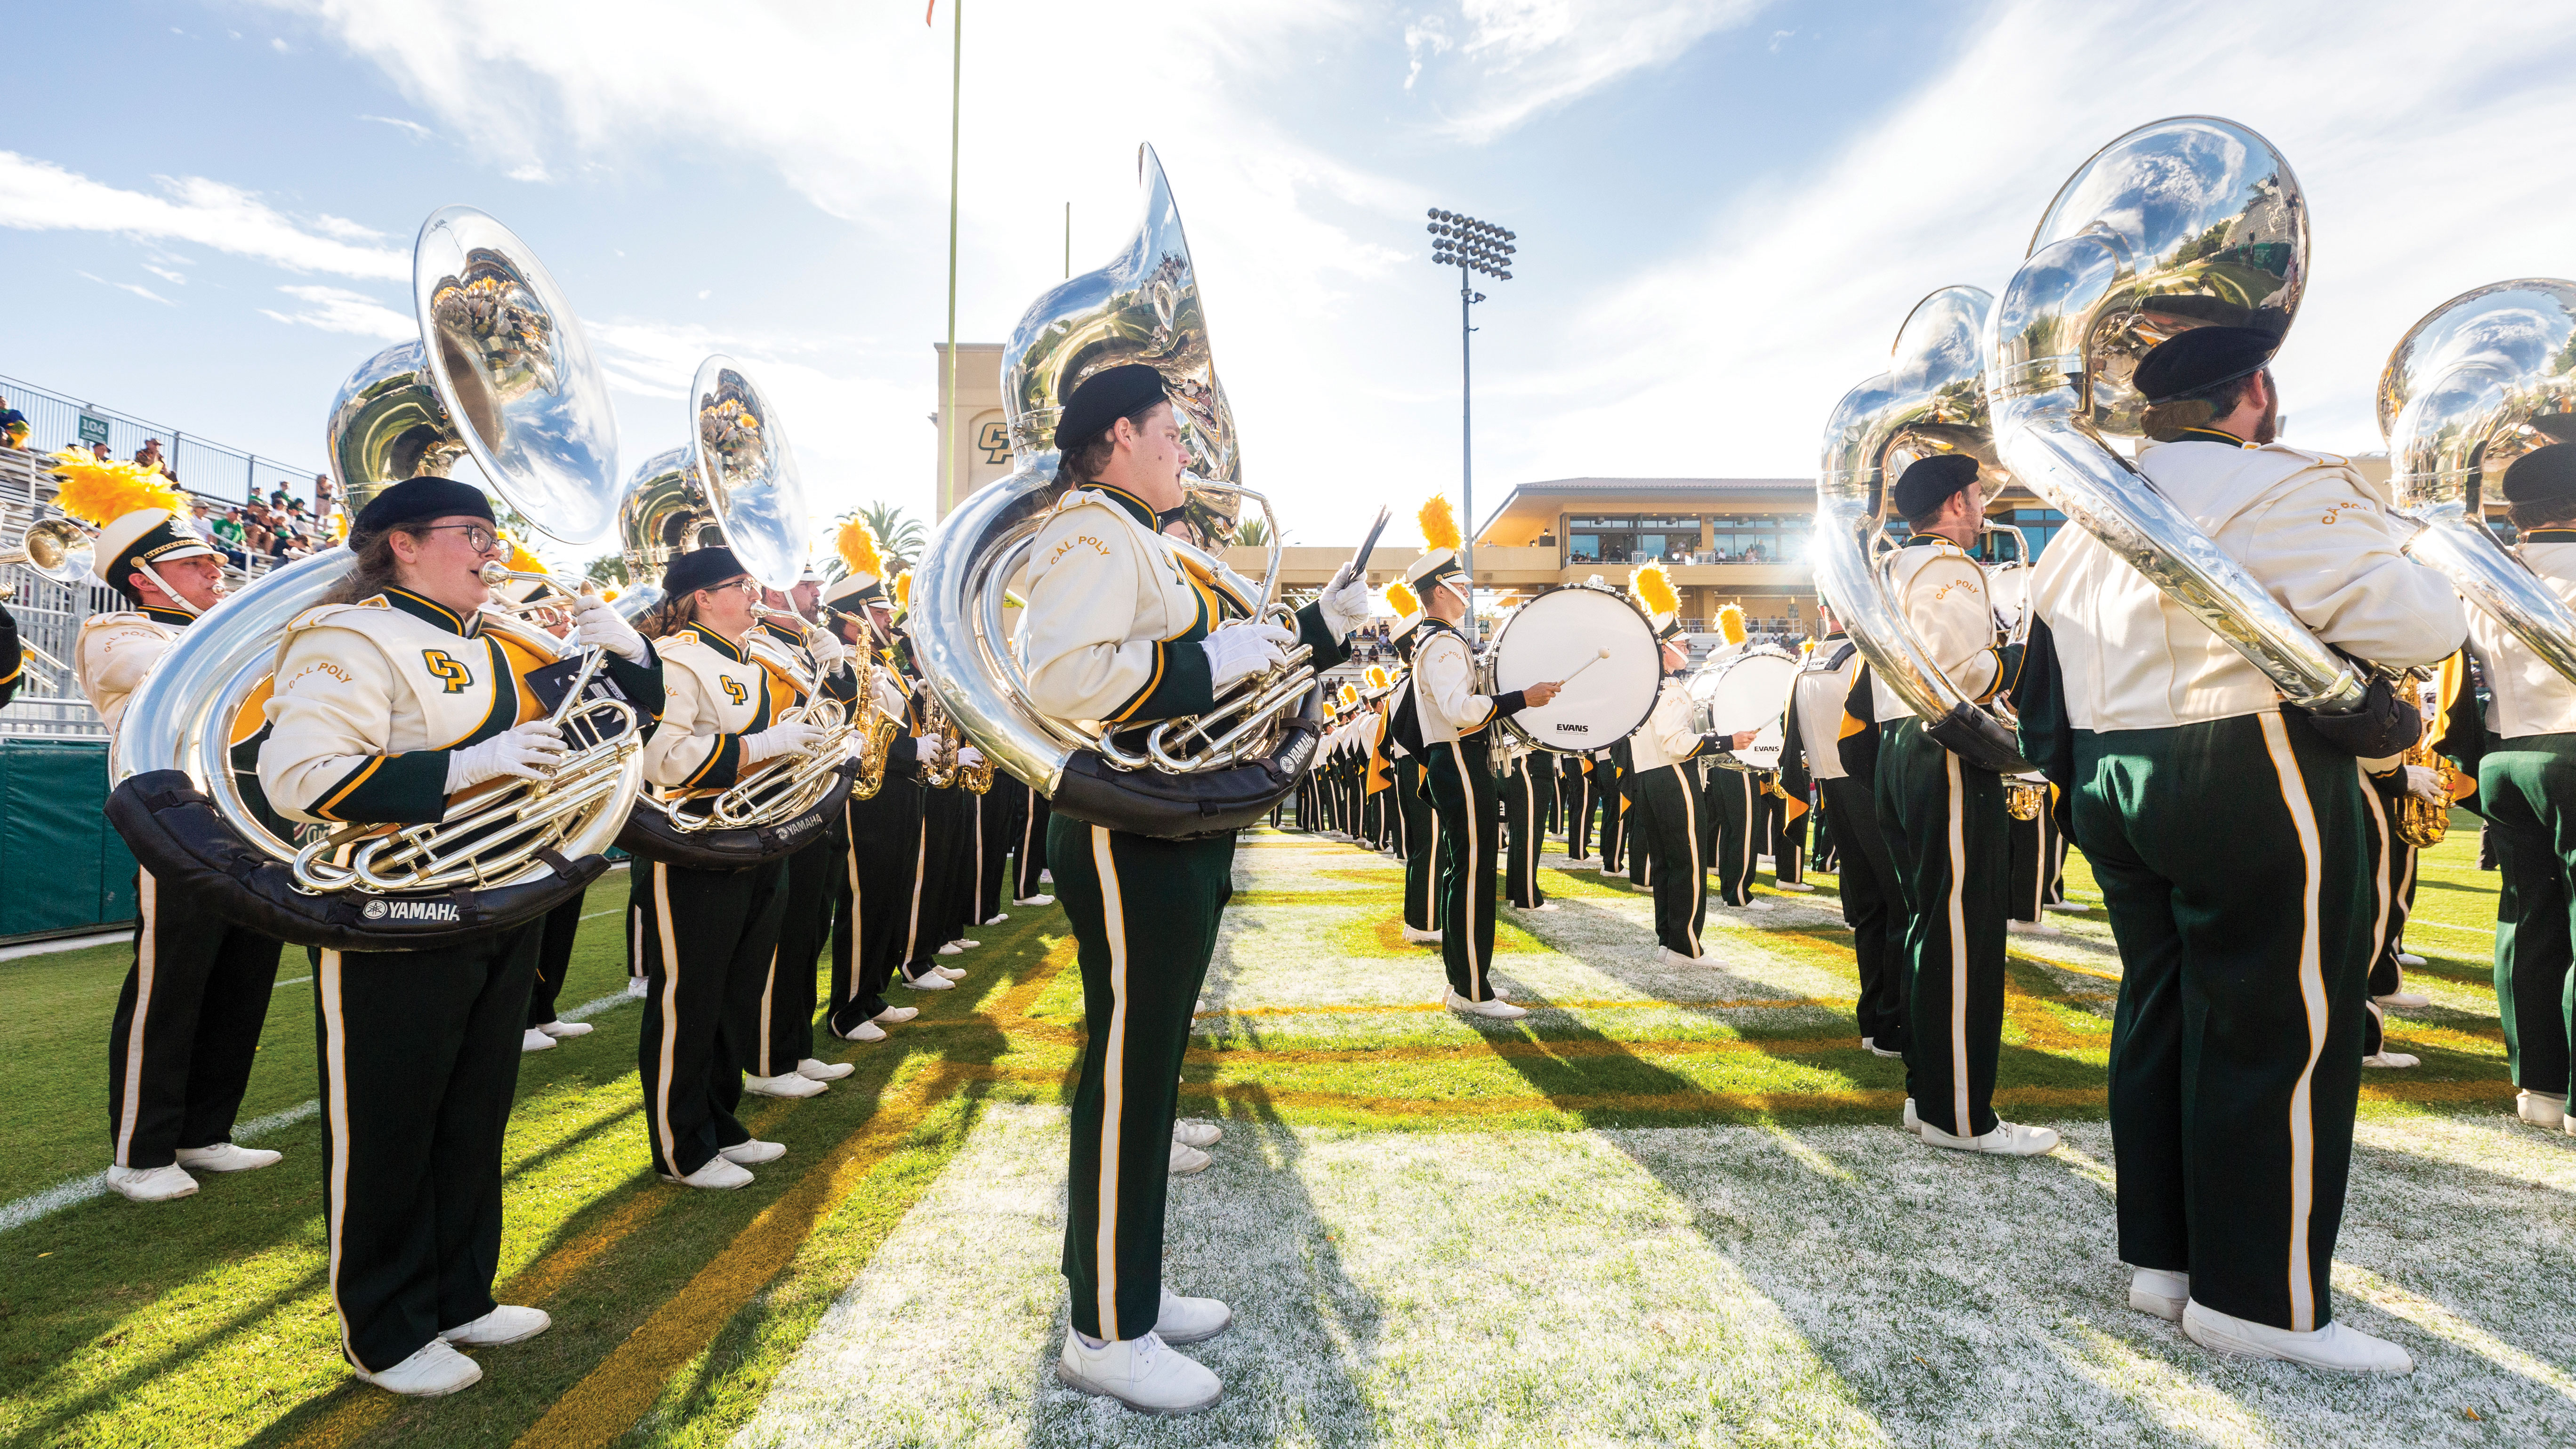 Cal Poly tuba players and drummers stand in formation and play in Spanos Stadium before a football game.